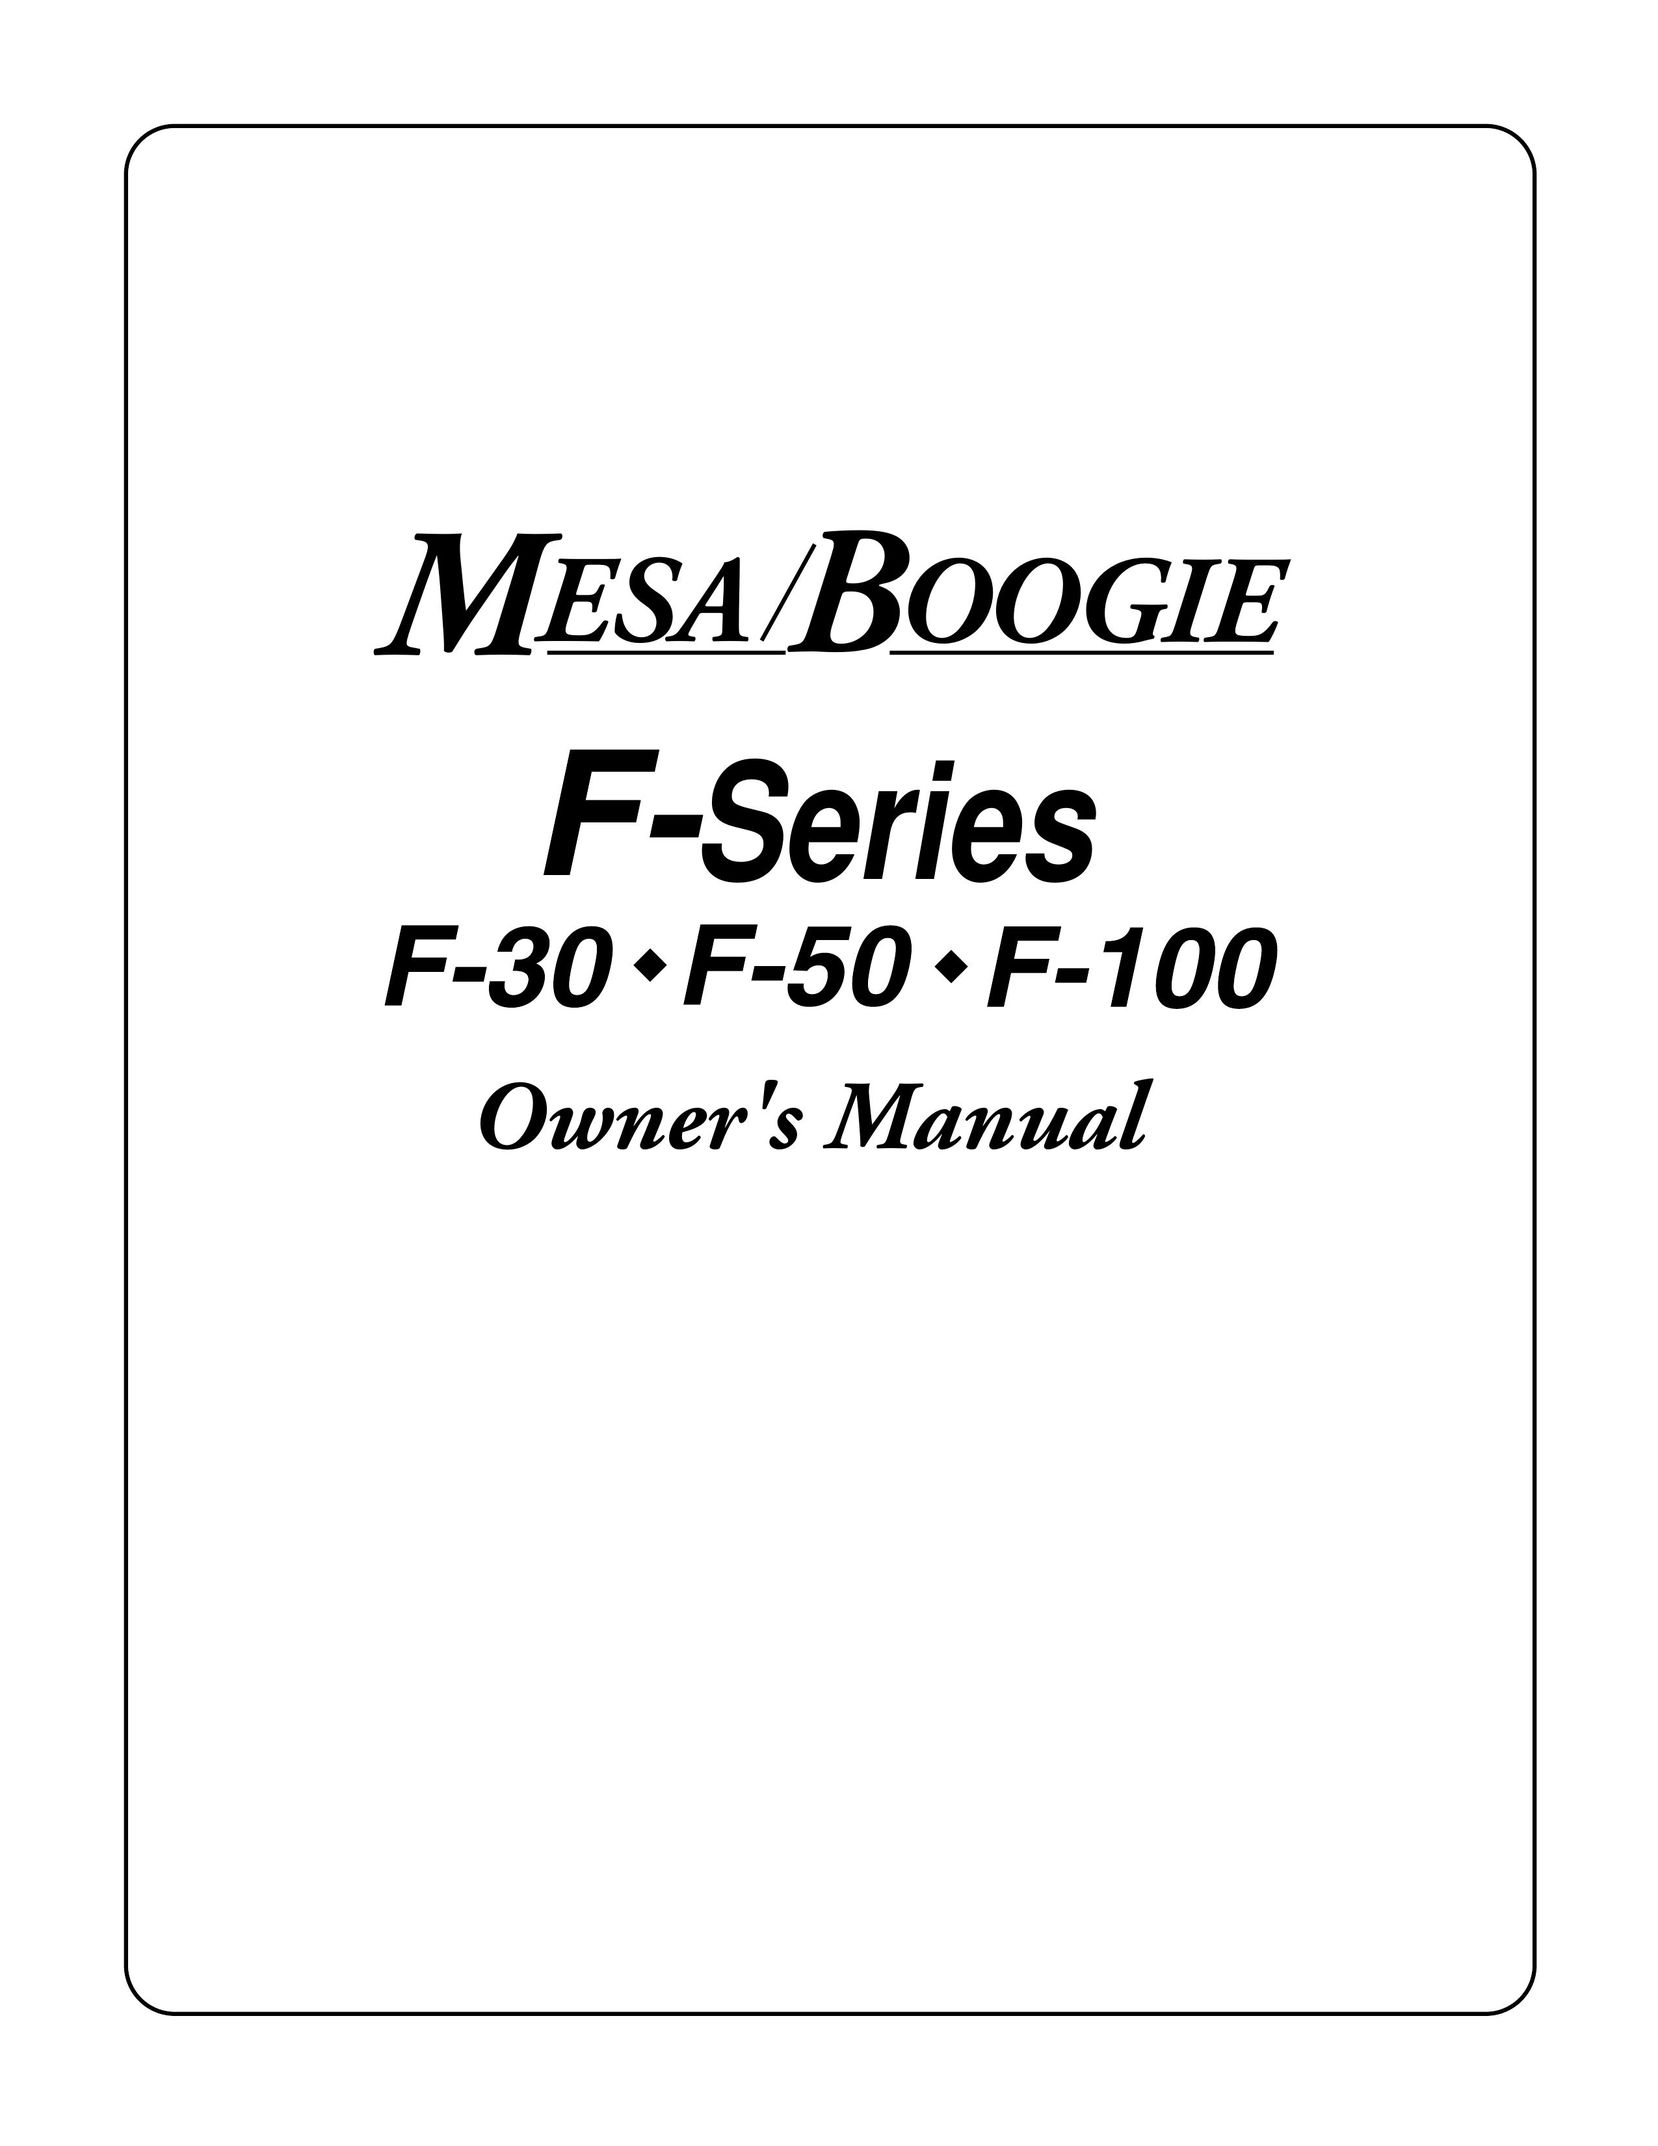 Mesa/Boogie F-50 Stereo Receiver User Manual